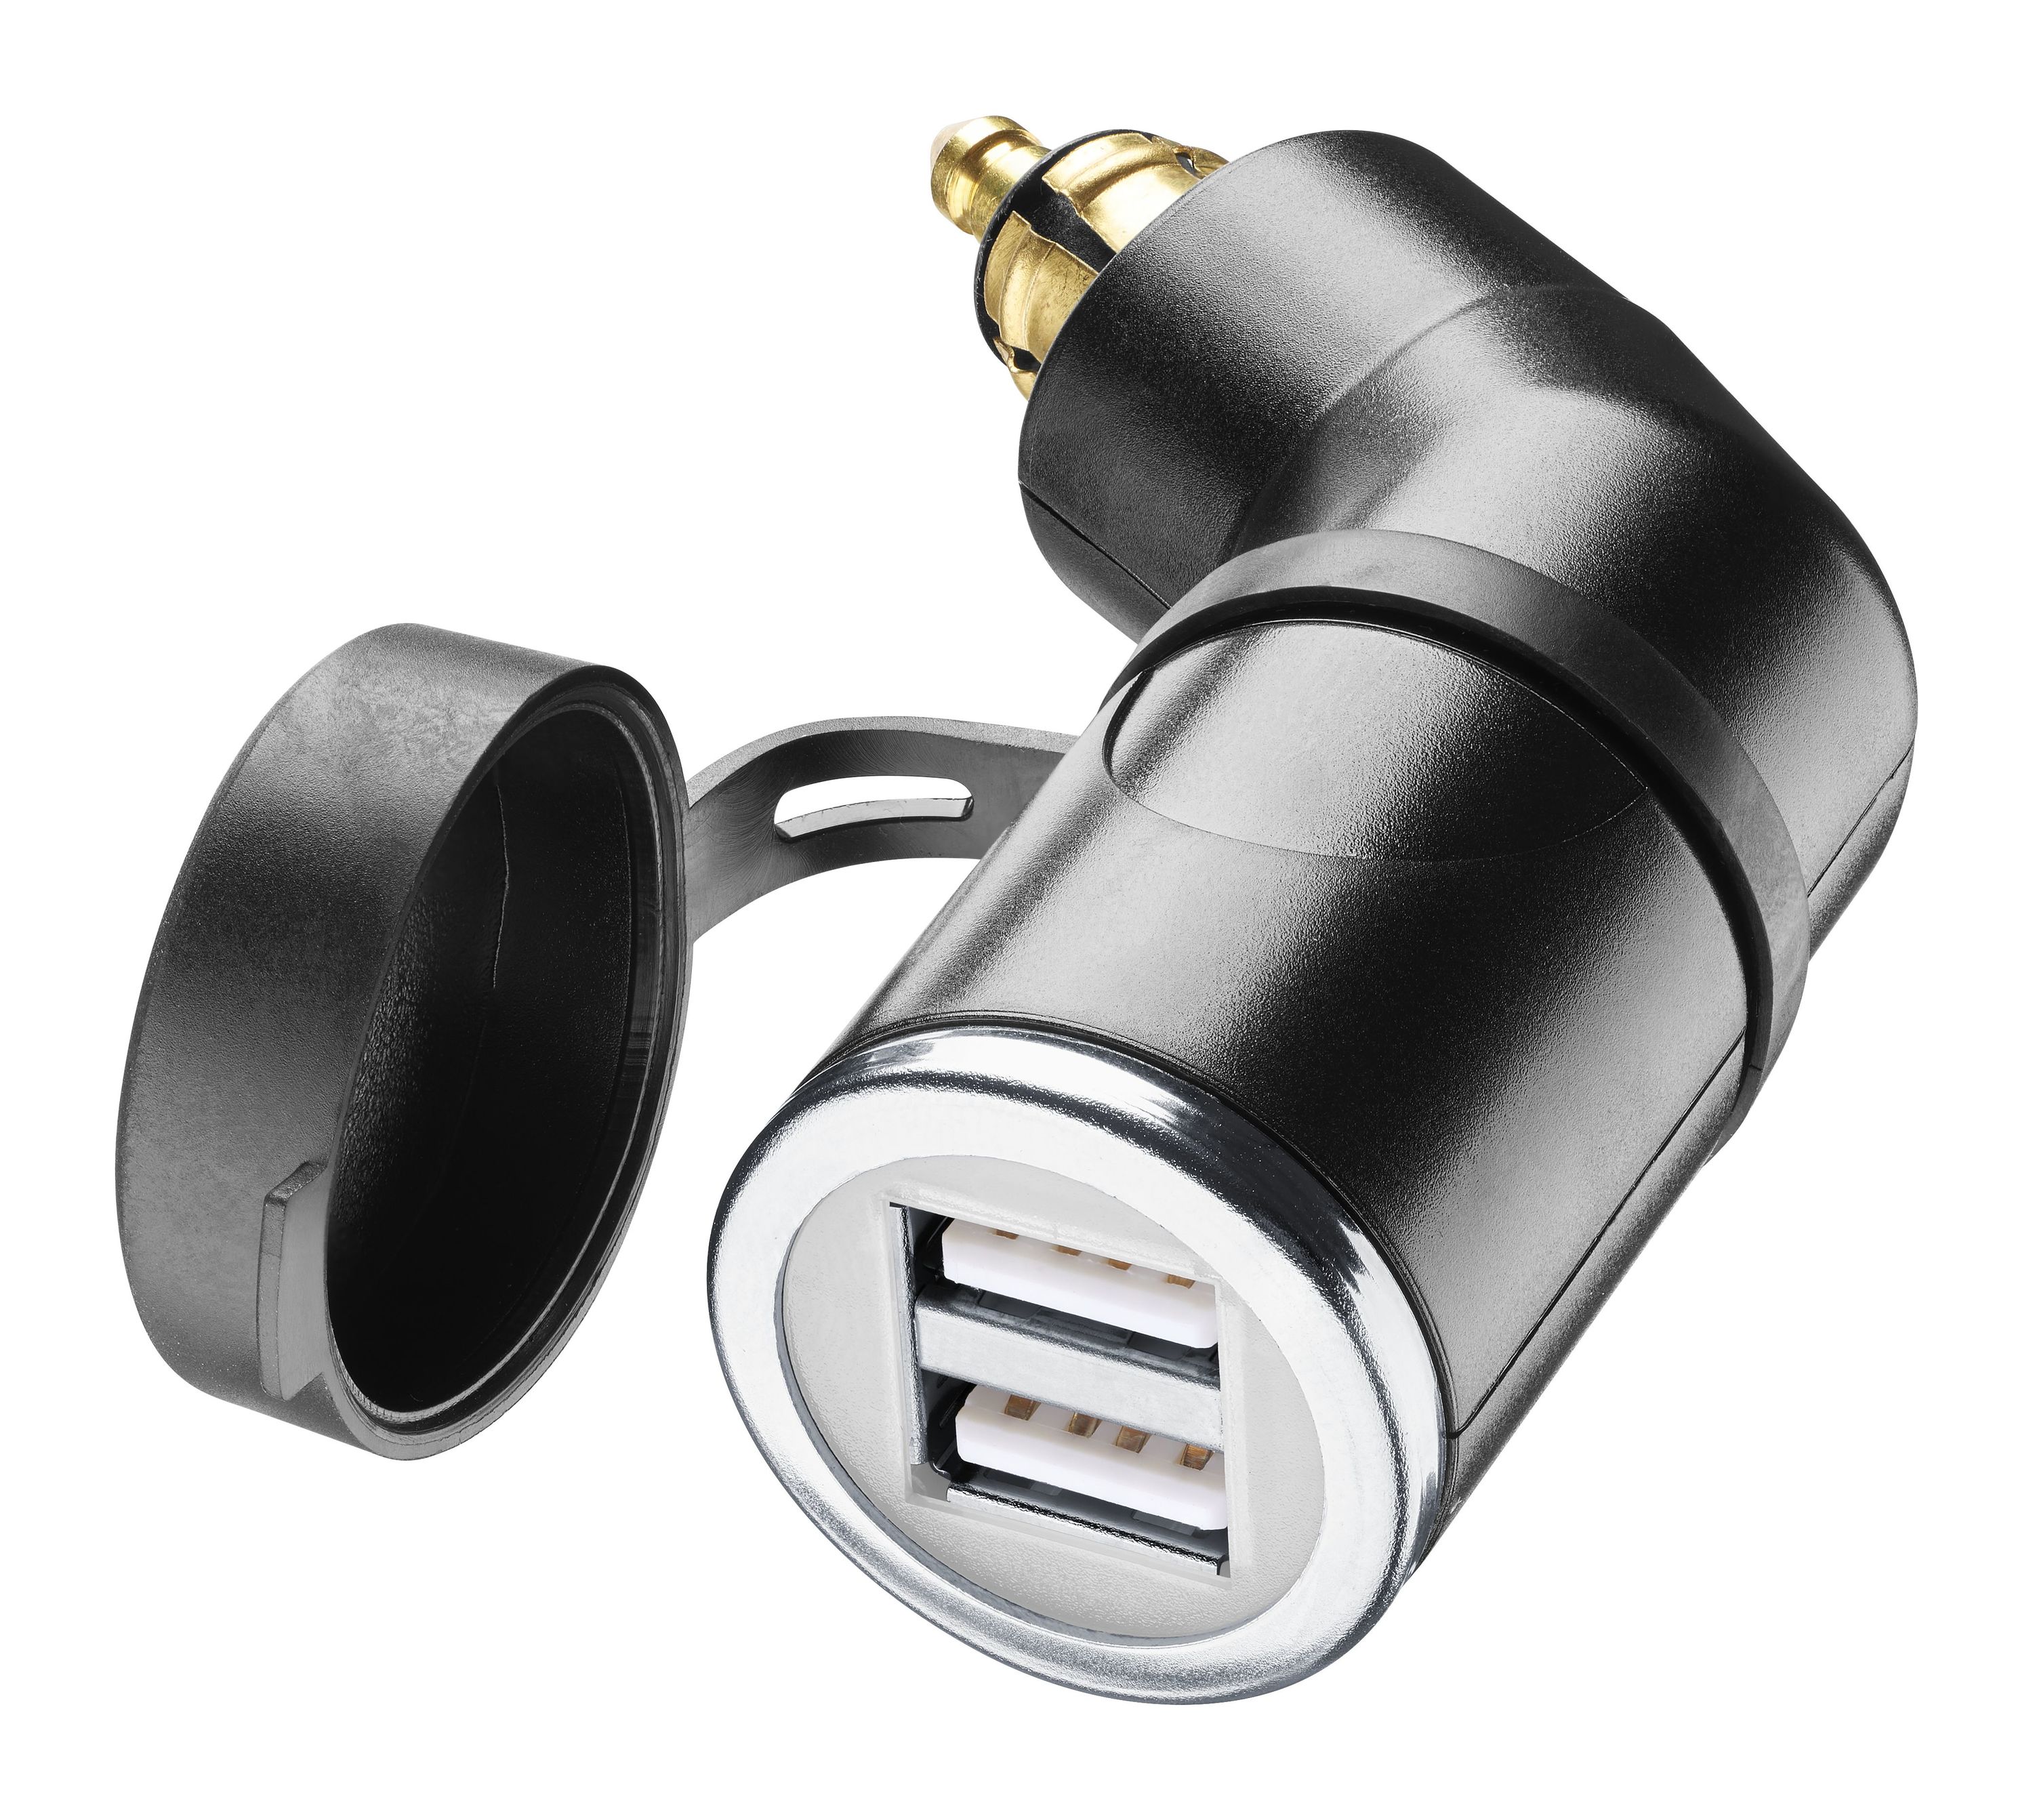 DIN-DOUBLE USB ADAPTER